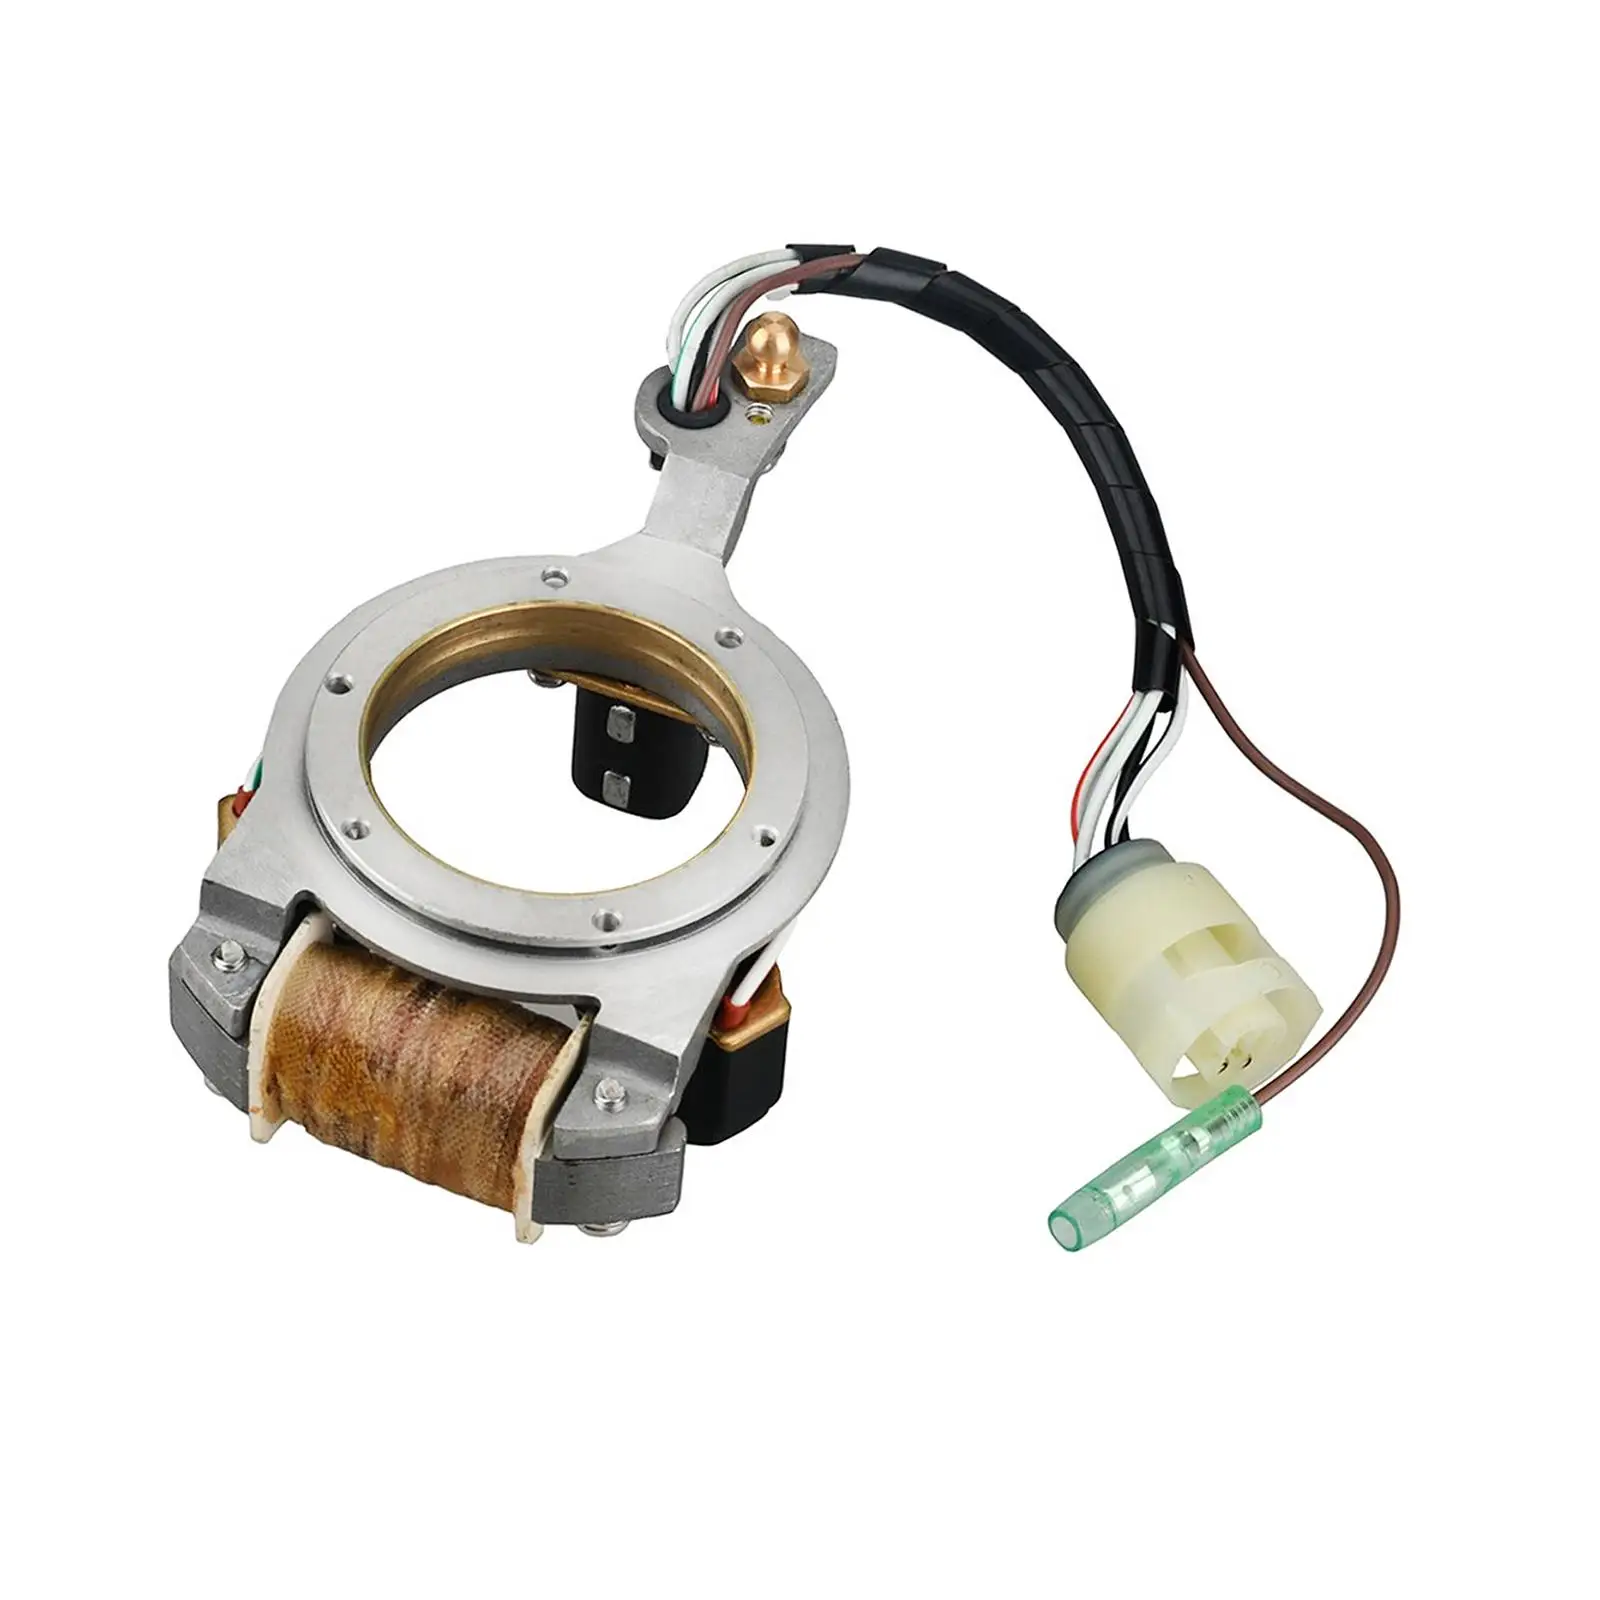 Boat Motor Stator Assy 6H3-85510-A1 for Yamaha Outboard Engine 60HP Professional Vehicle Repair Parts Easily Install